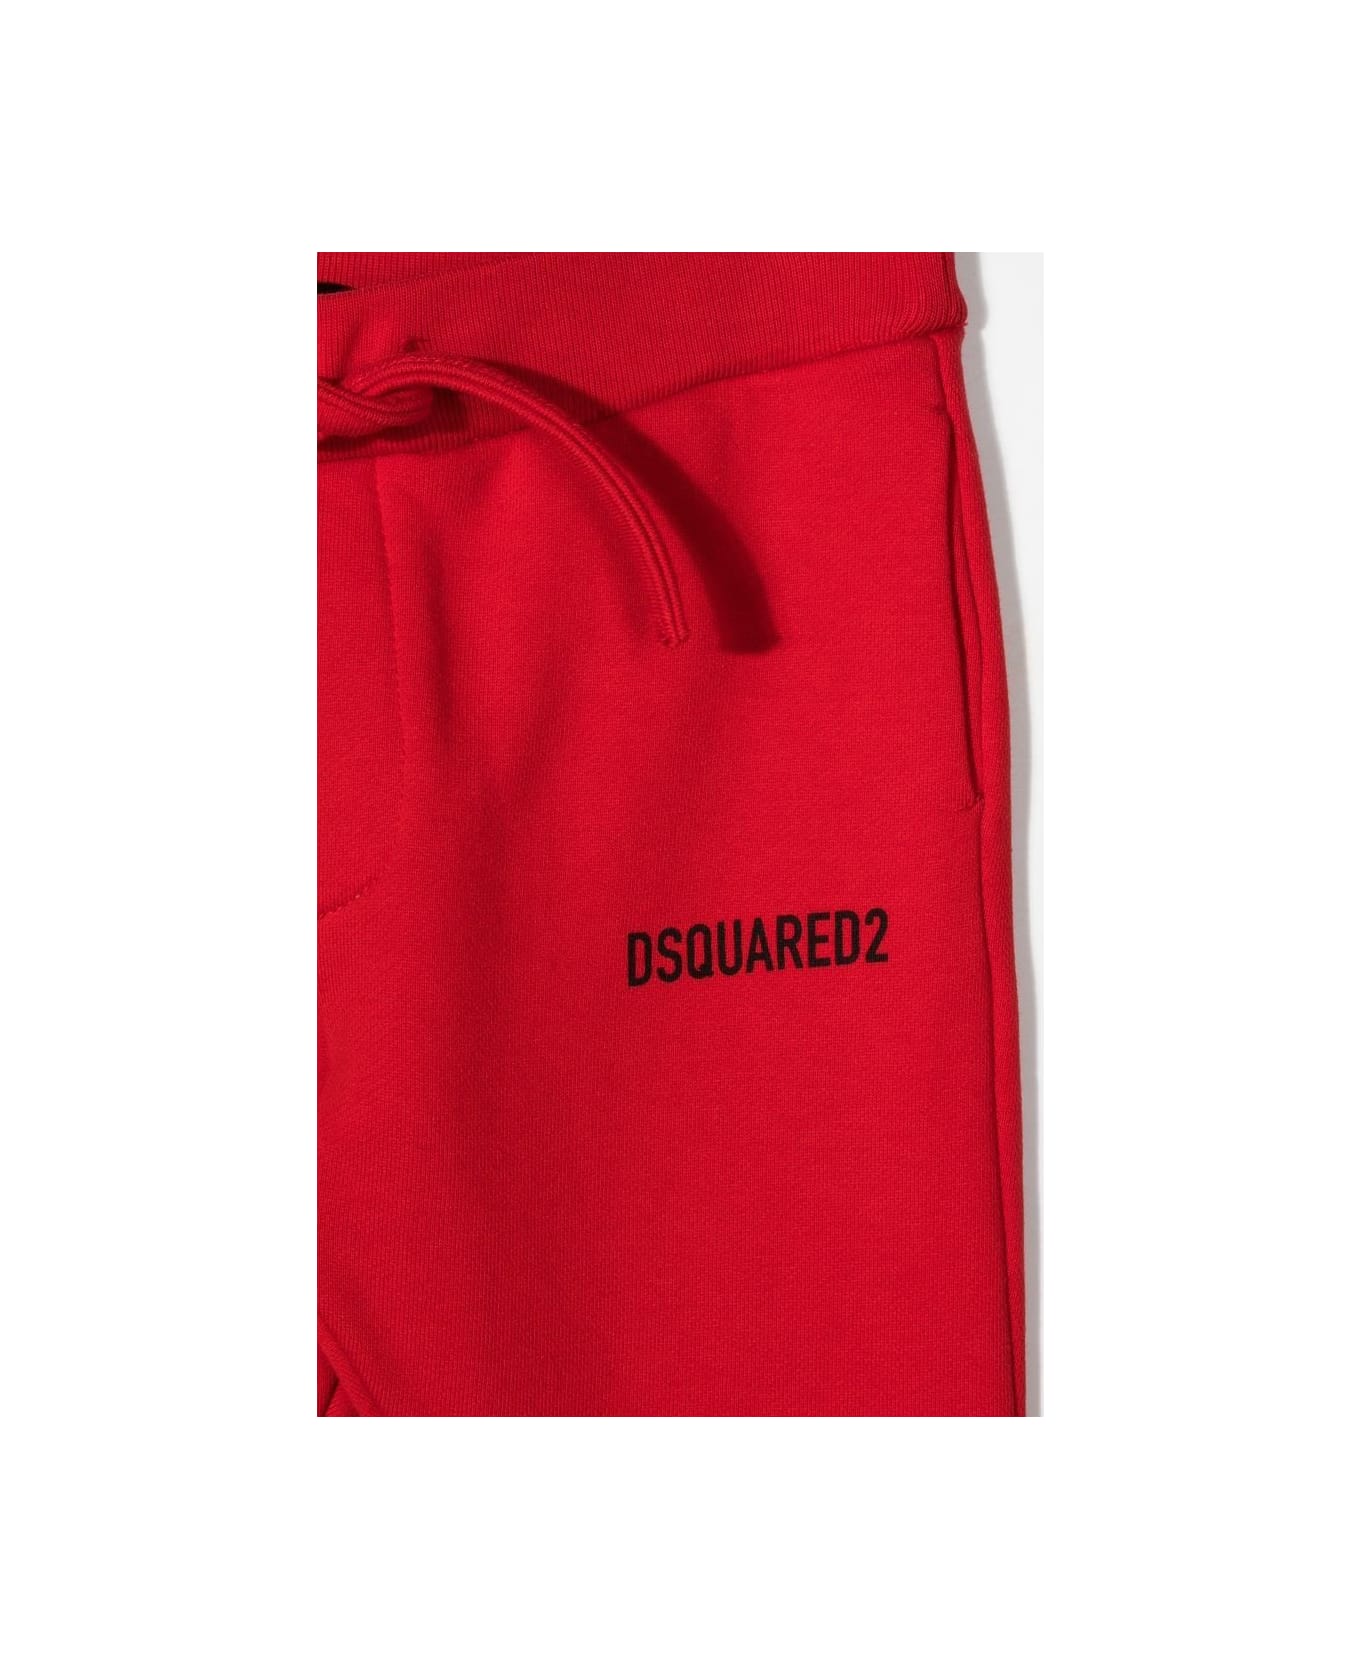 Dsquared2 Trousers With Print - Red ボトムス